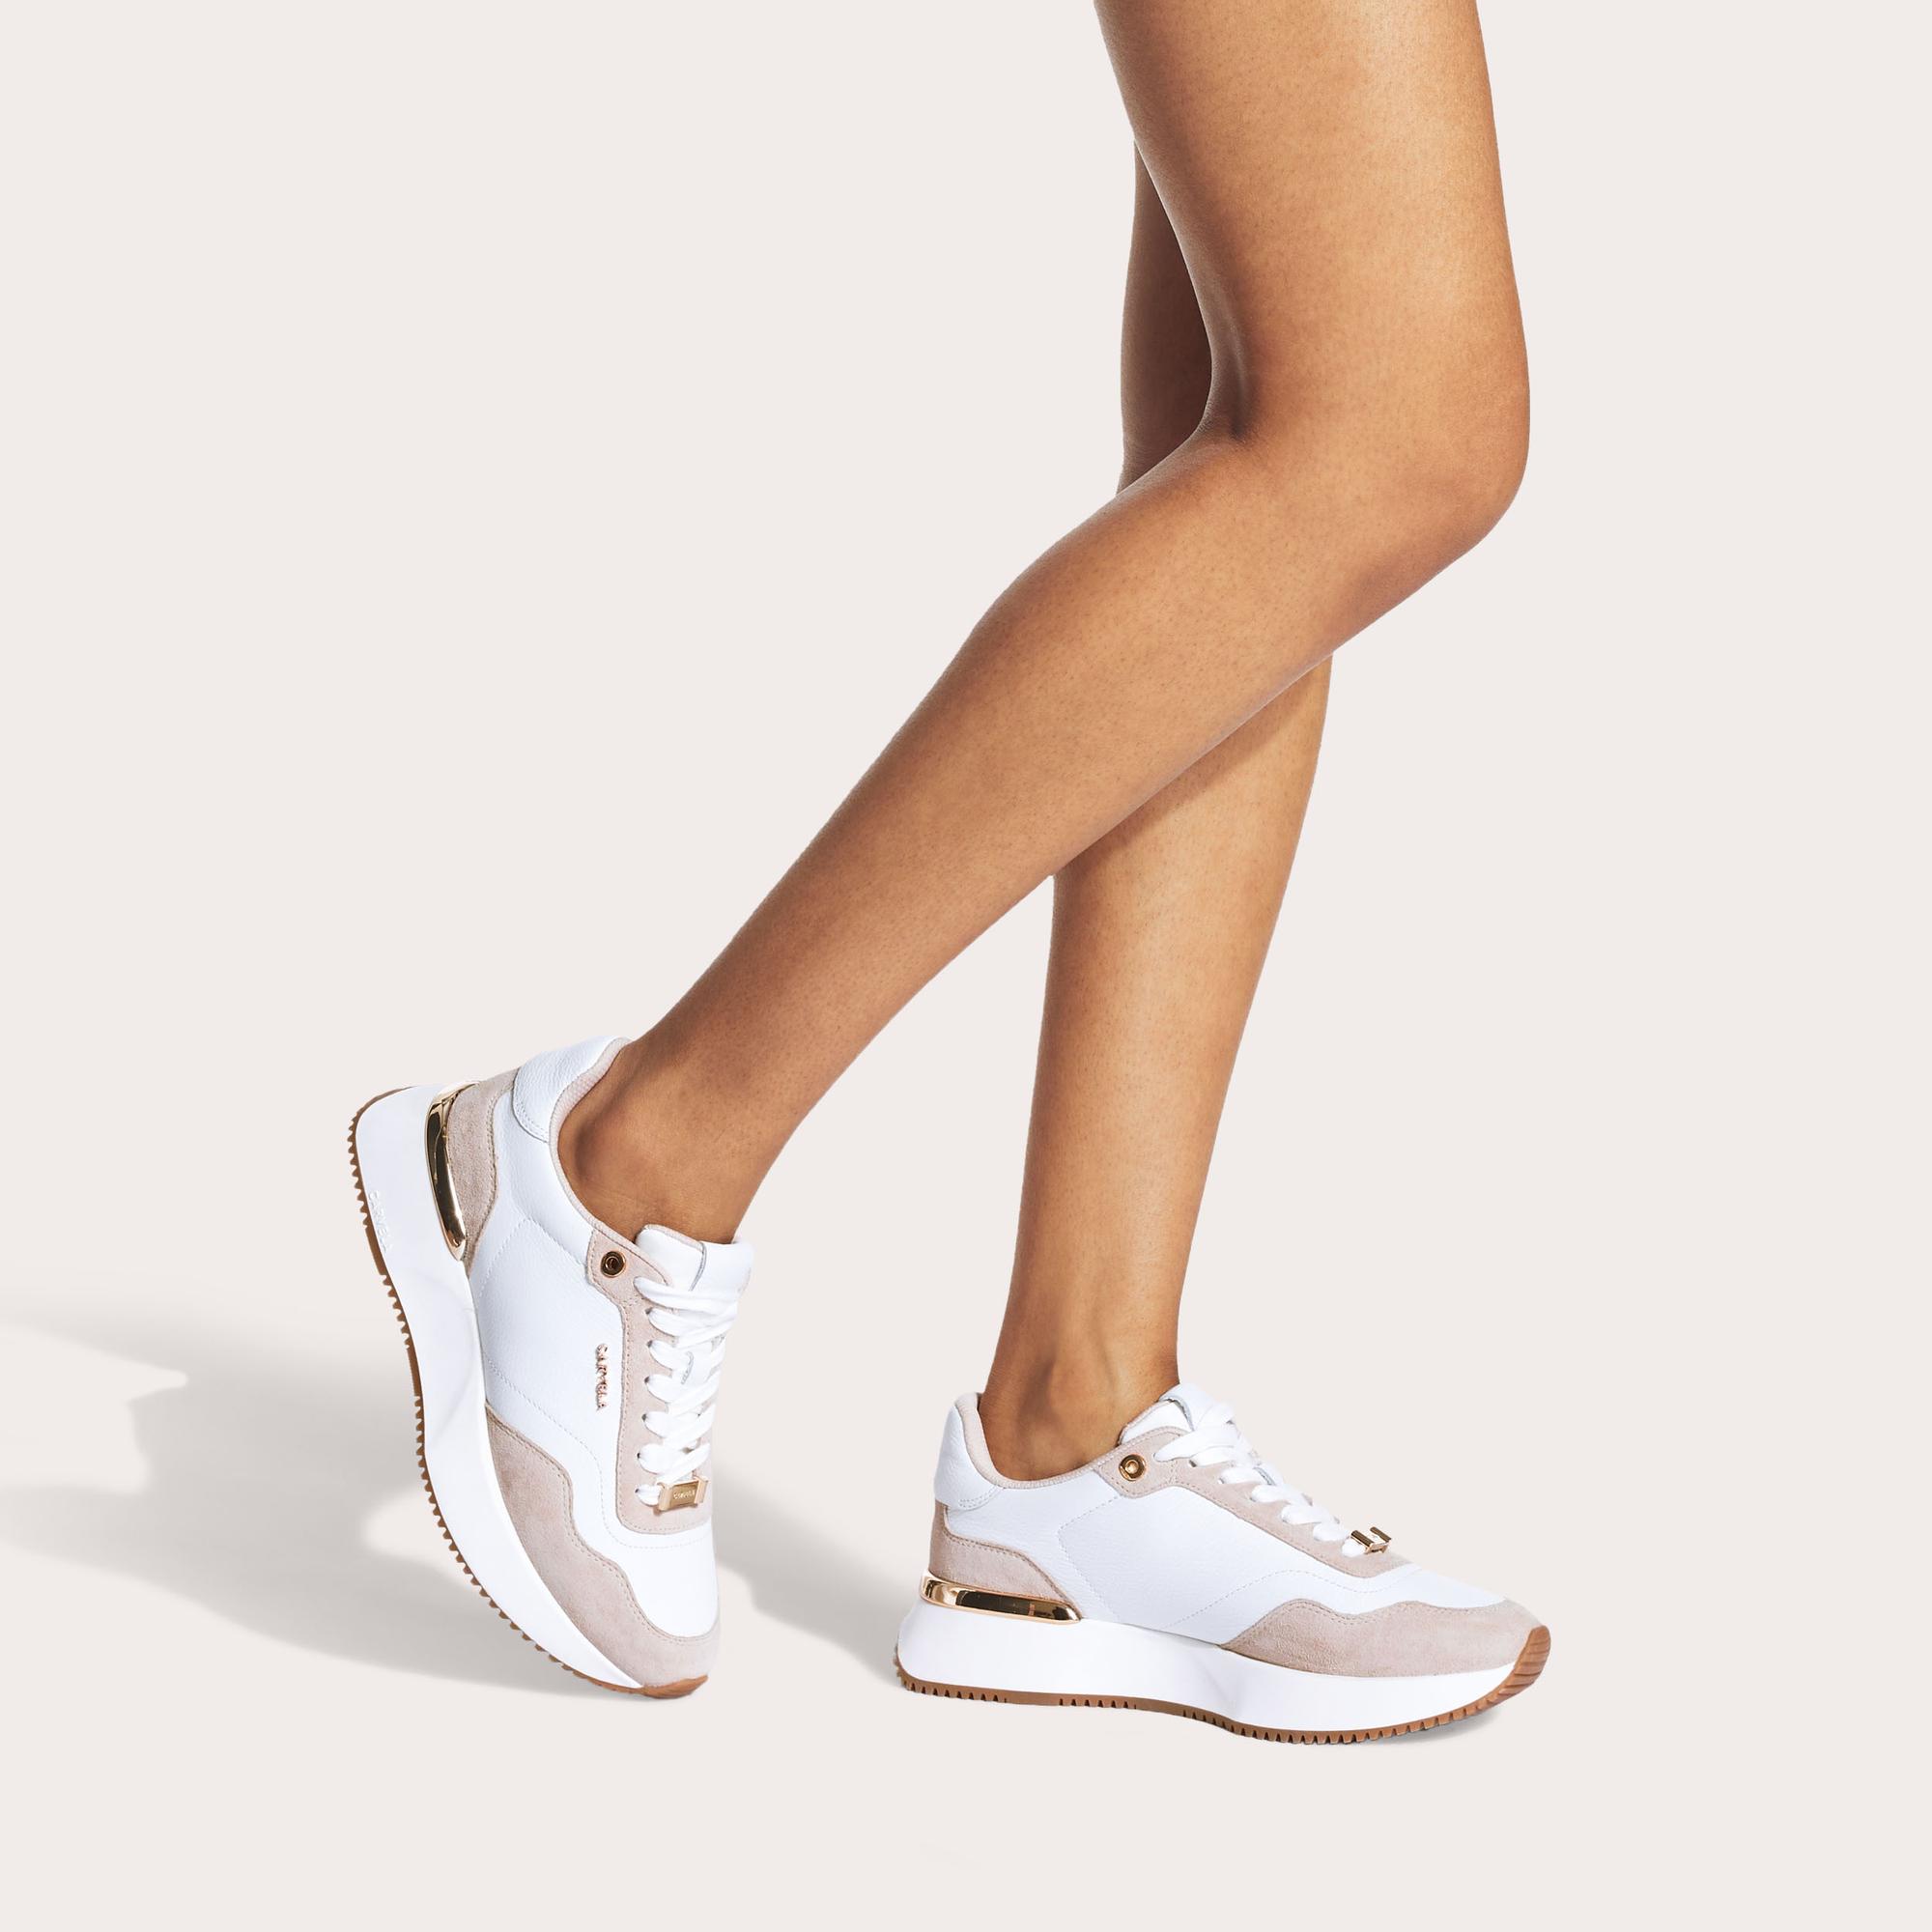 Women's Trainers | High Tops, Sock Sneakers & Casual Carvela